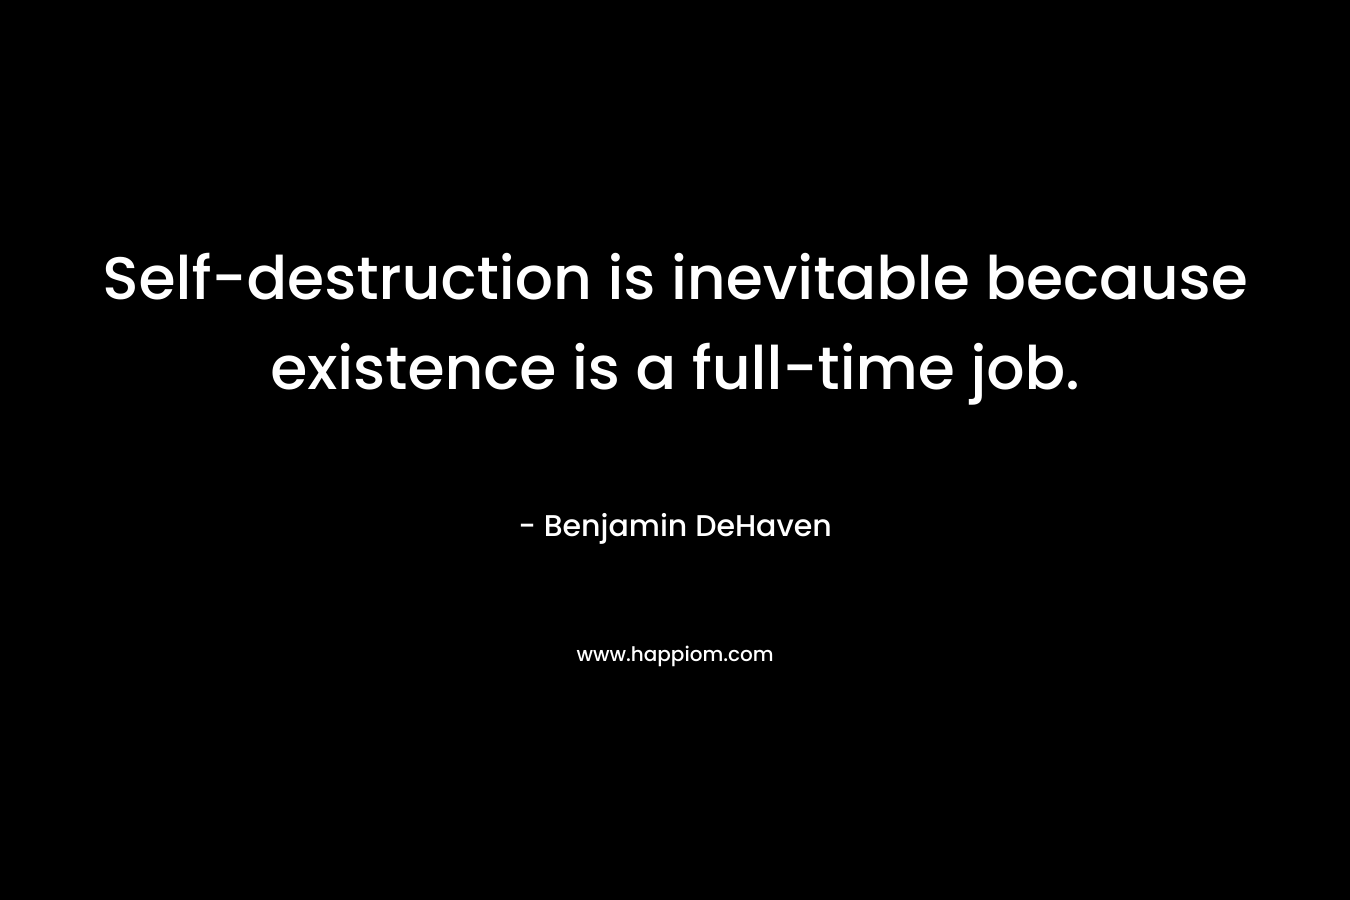 Self-destruction is inevitable because existence is a full-time job.